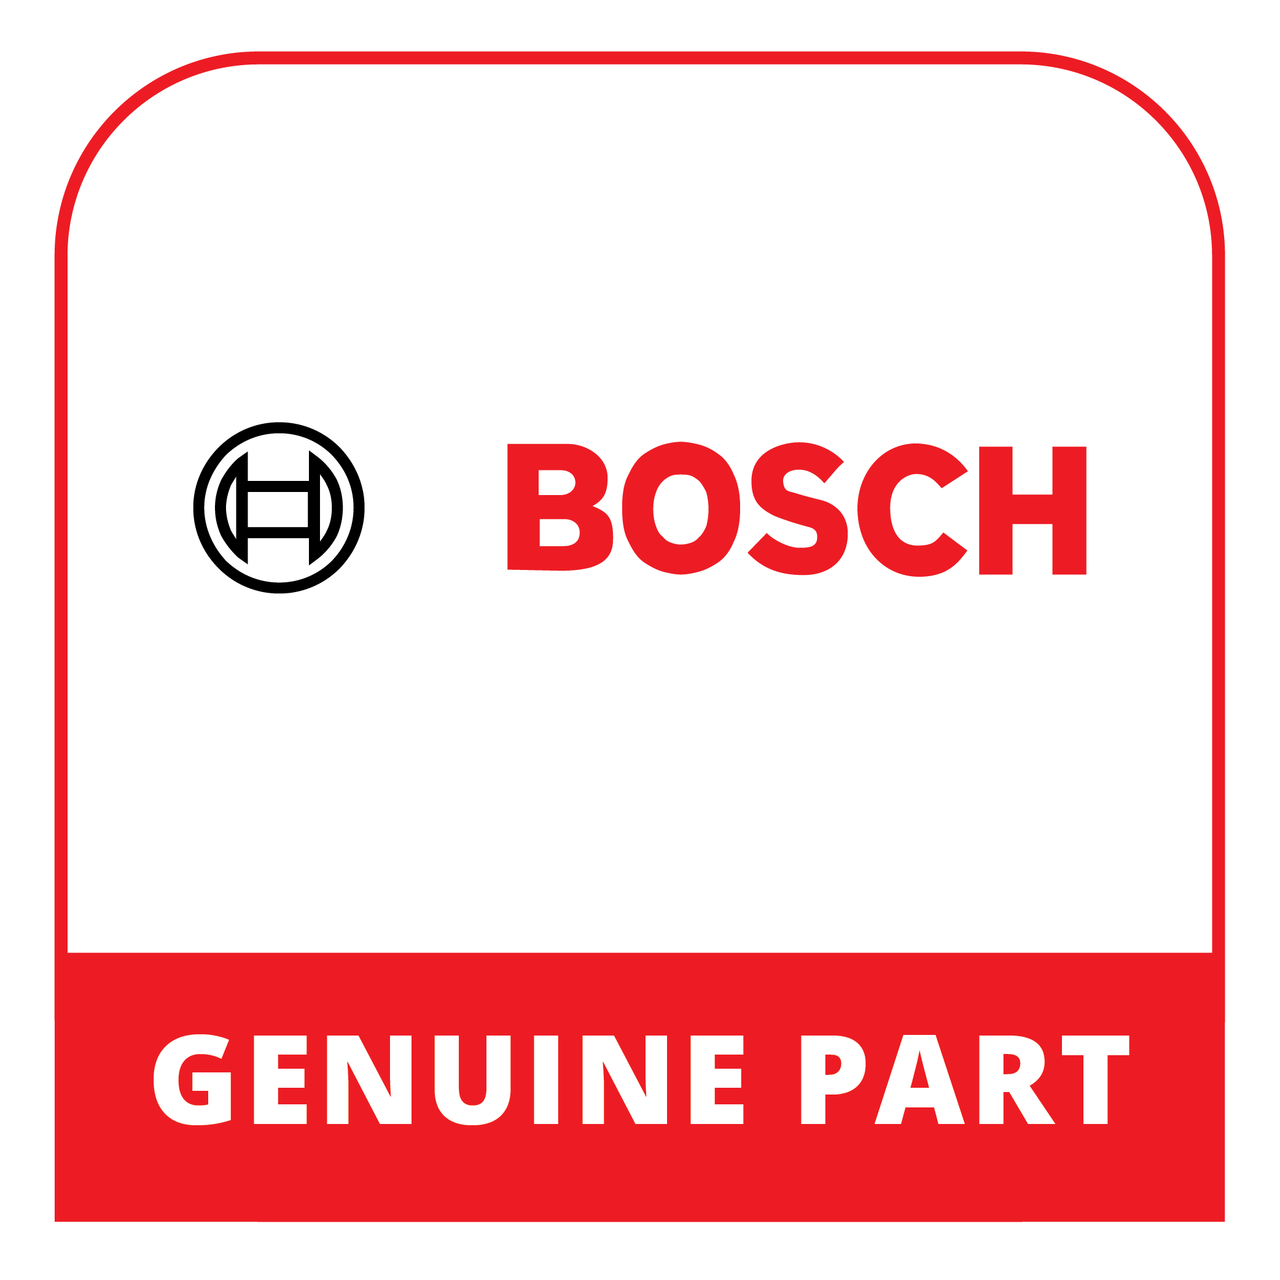 Bosch (Thermador) 00613441 - Adhesive Tape - Genuine Bosch (Thermador) Part